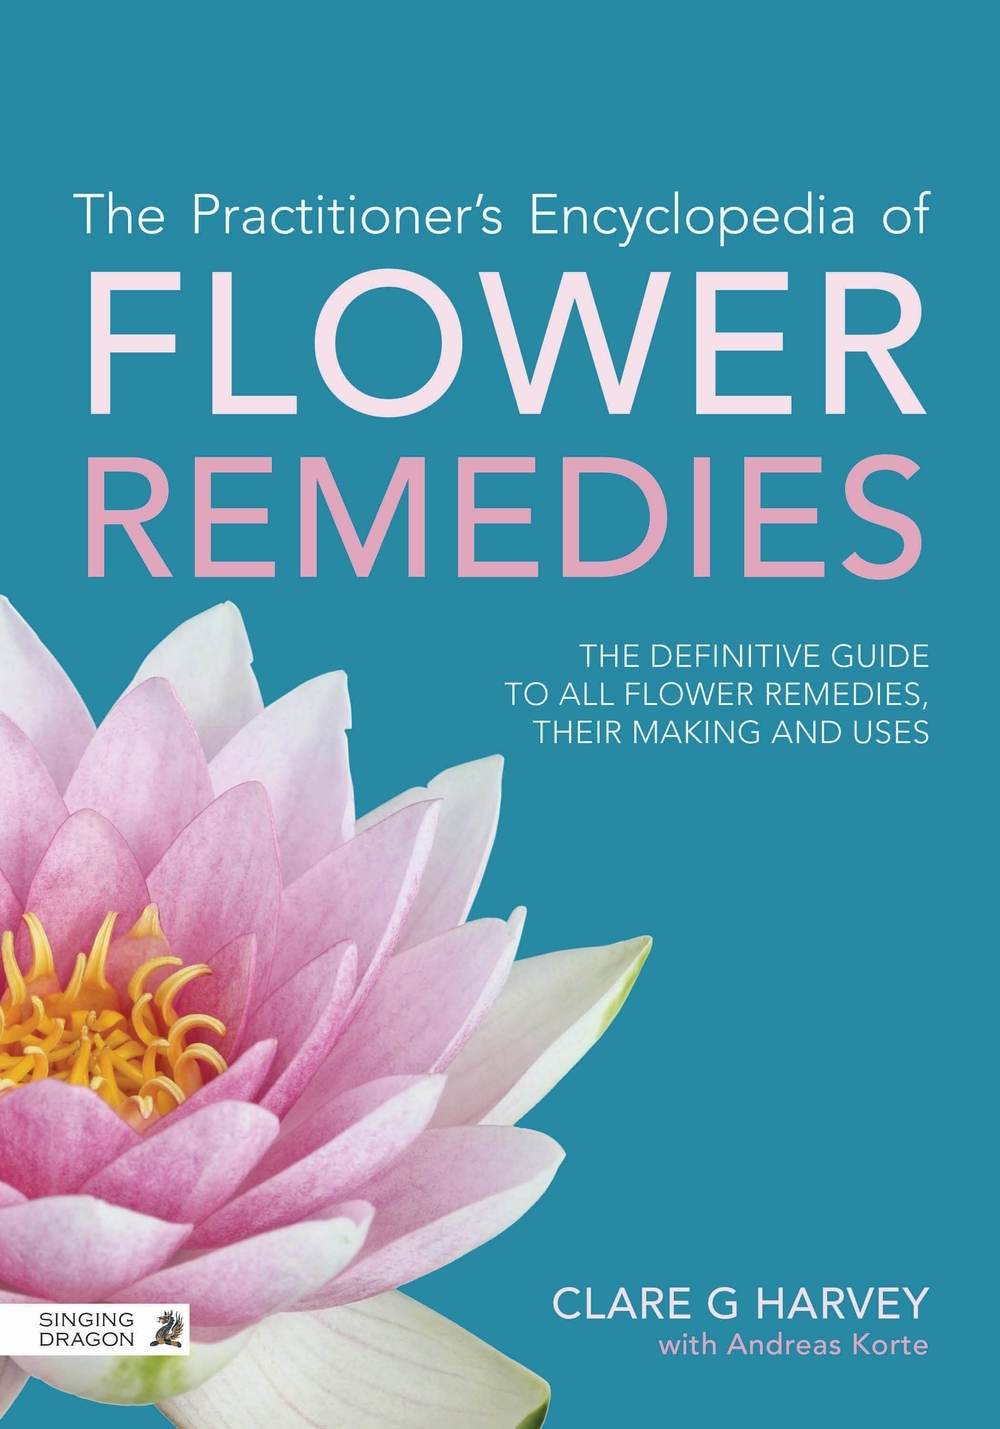 The Practitioner's Encyclopedia of Flower Remedies by Richard Gerber, Clare G Harvey